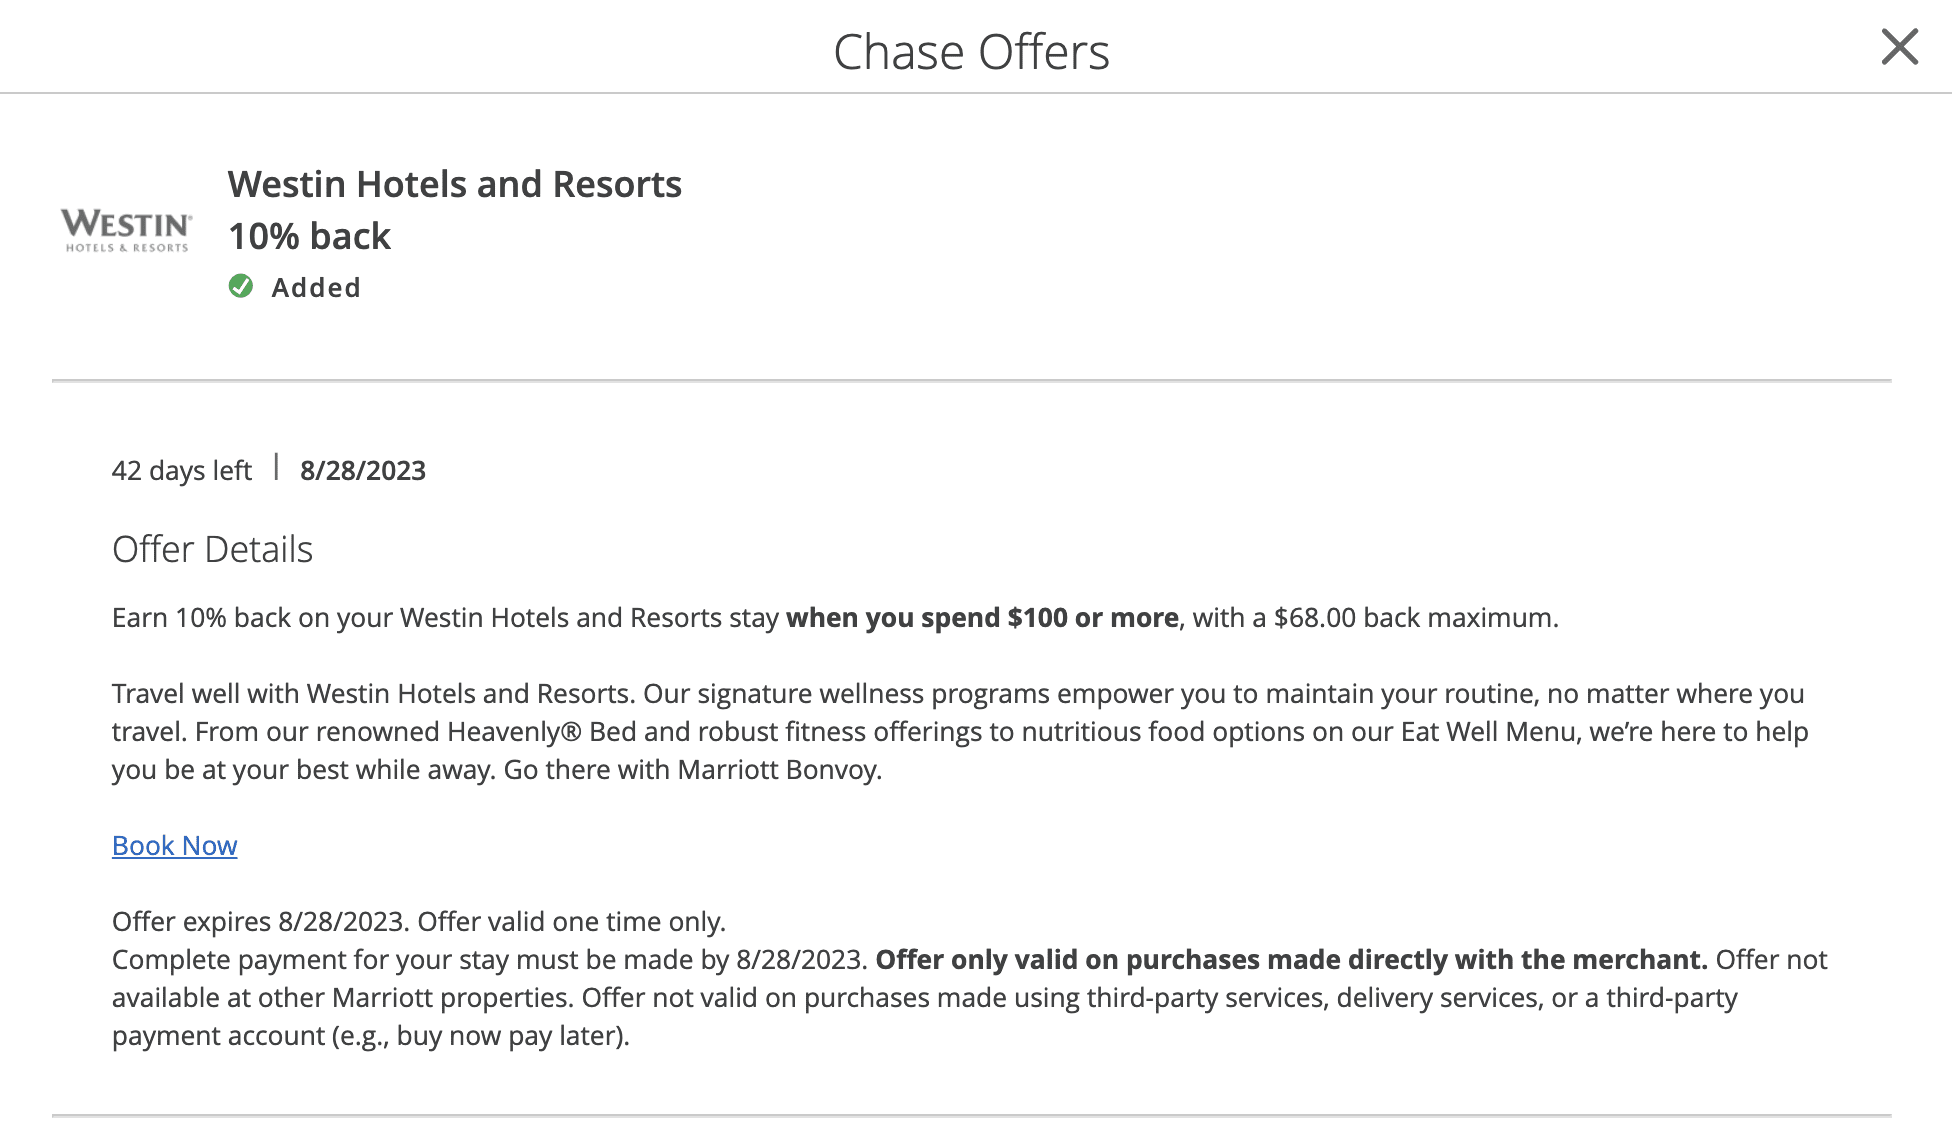 westin chase offer